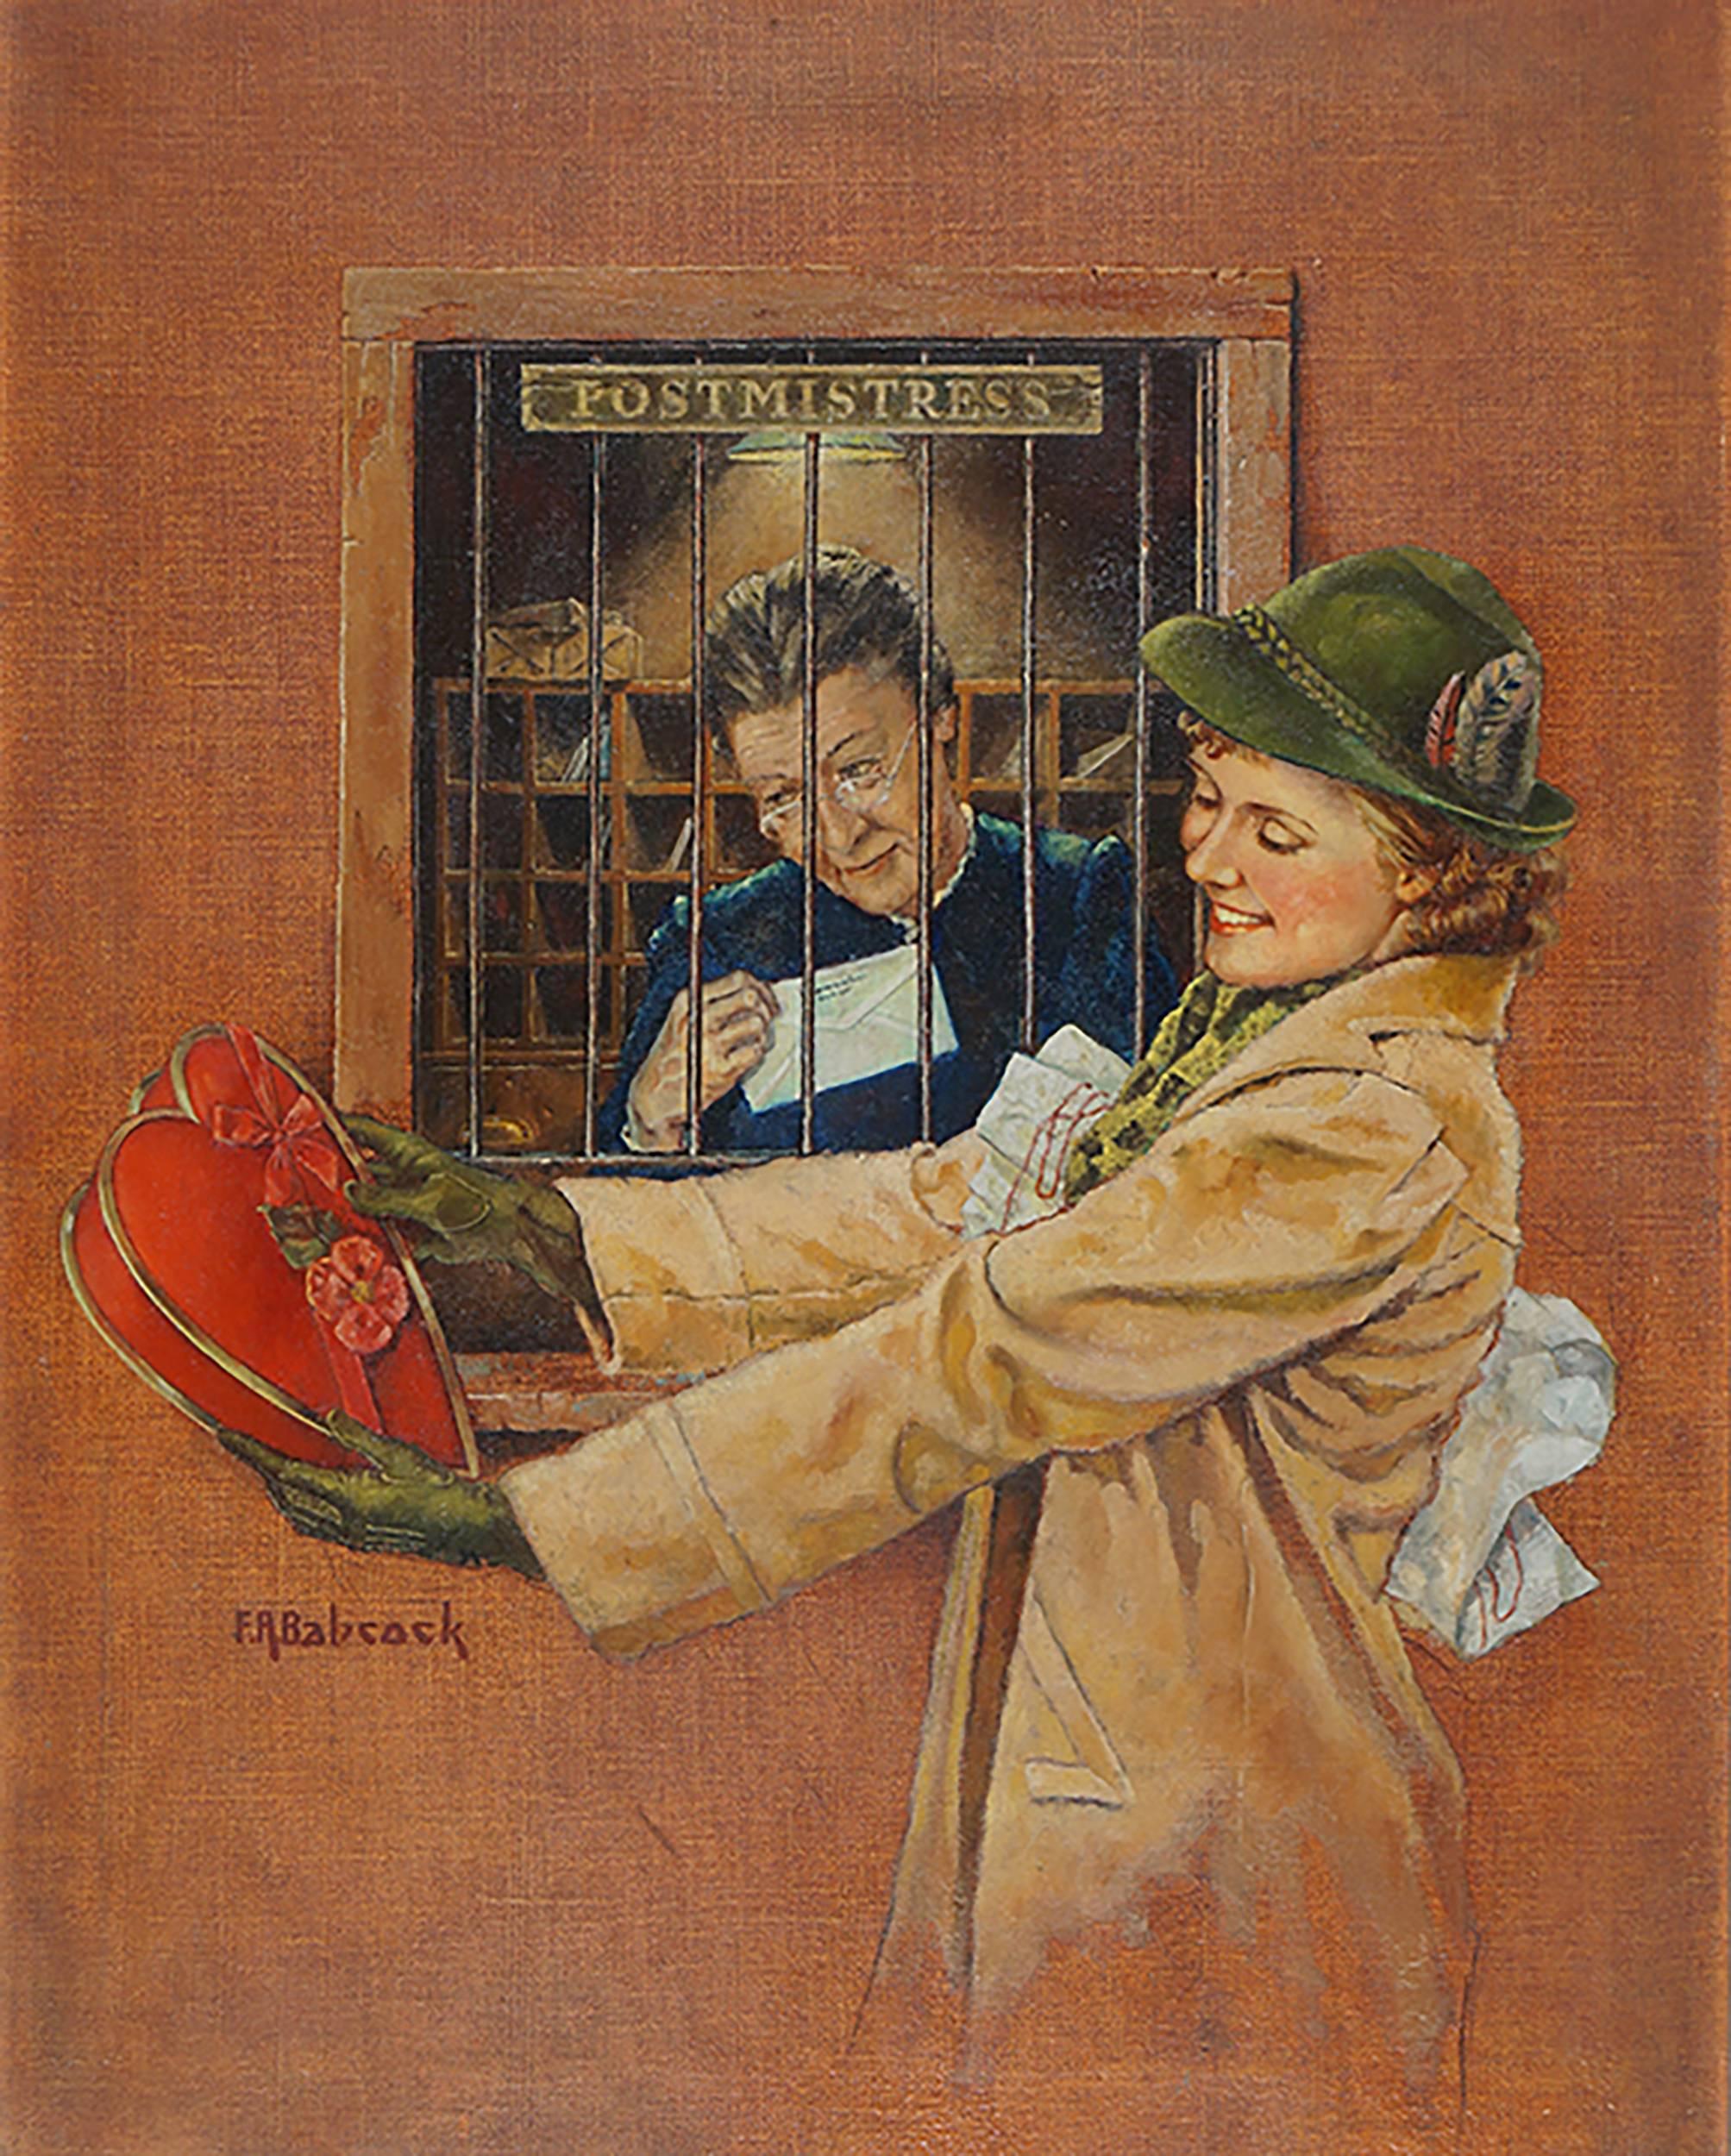 Woman Receiving Box of Chocolates at the Post Office, Liberty Magazine